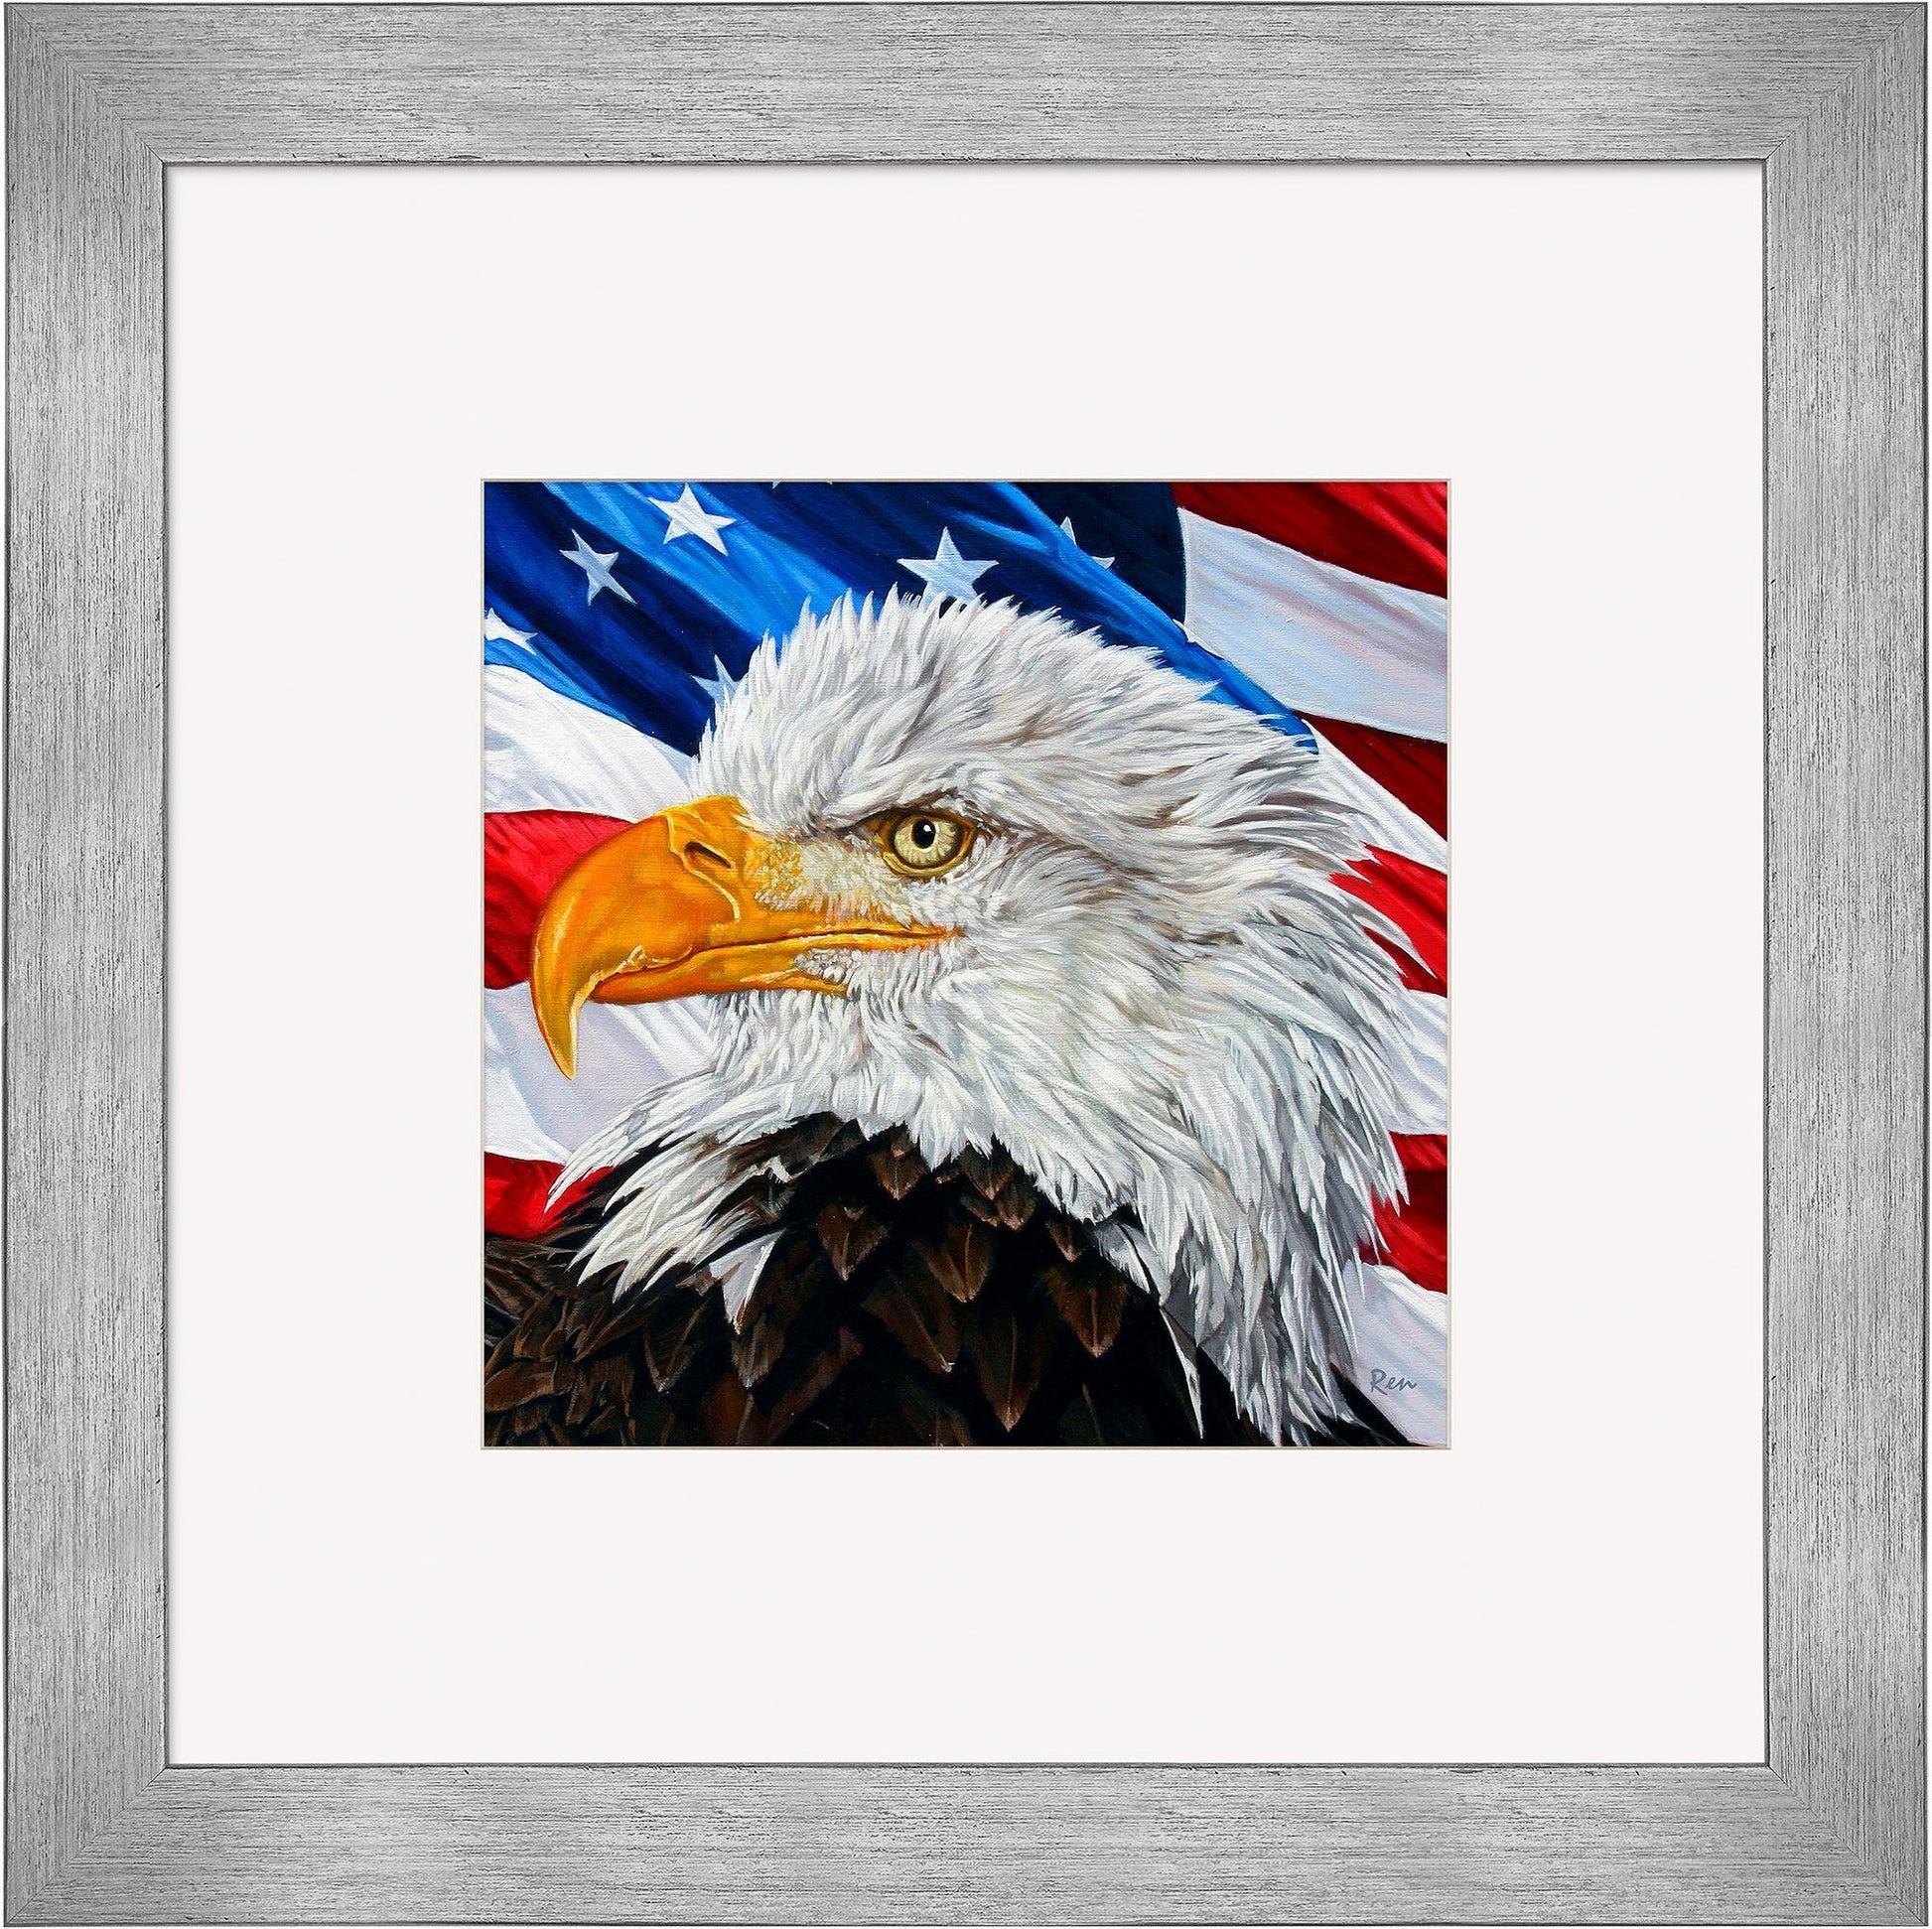 Let Freedom Ring—Bald Eagle Contempo Square - Wild Wings